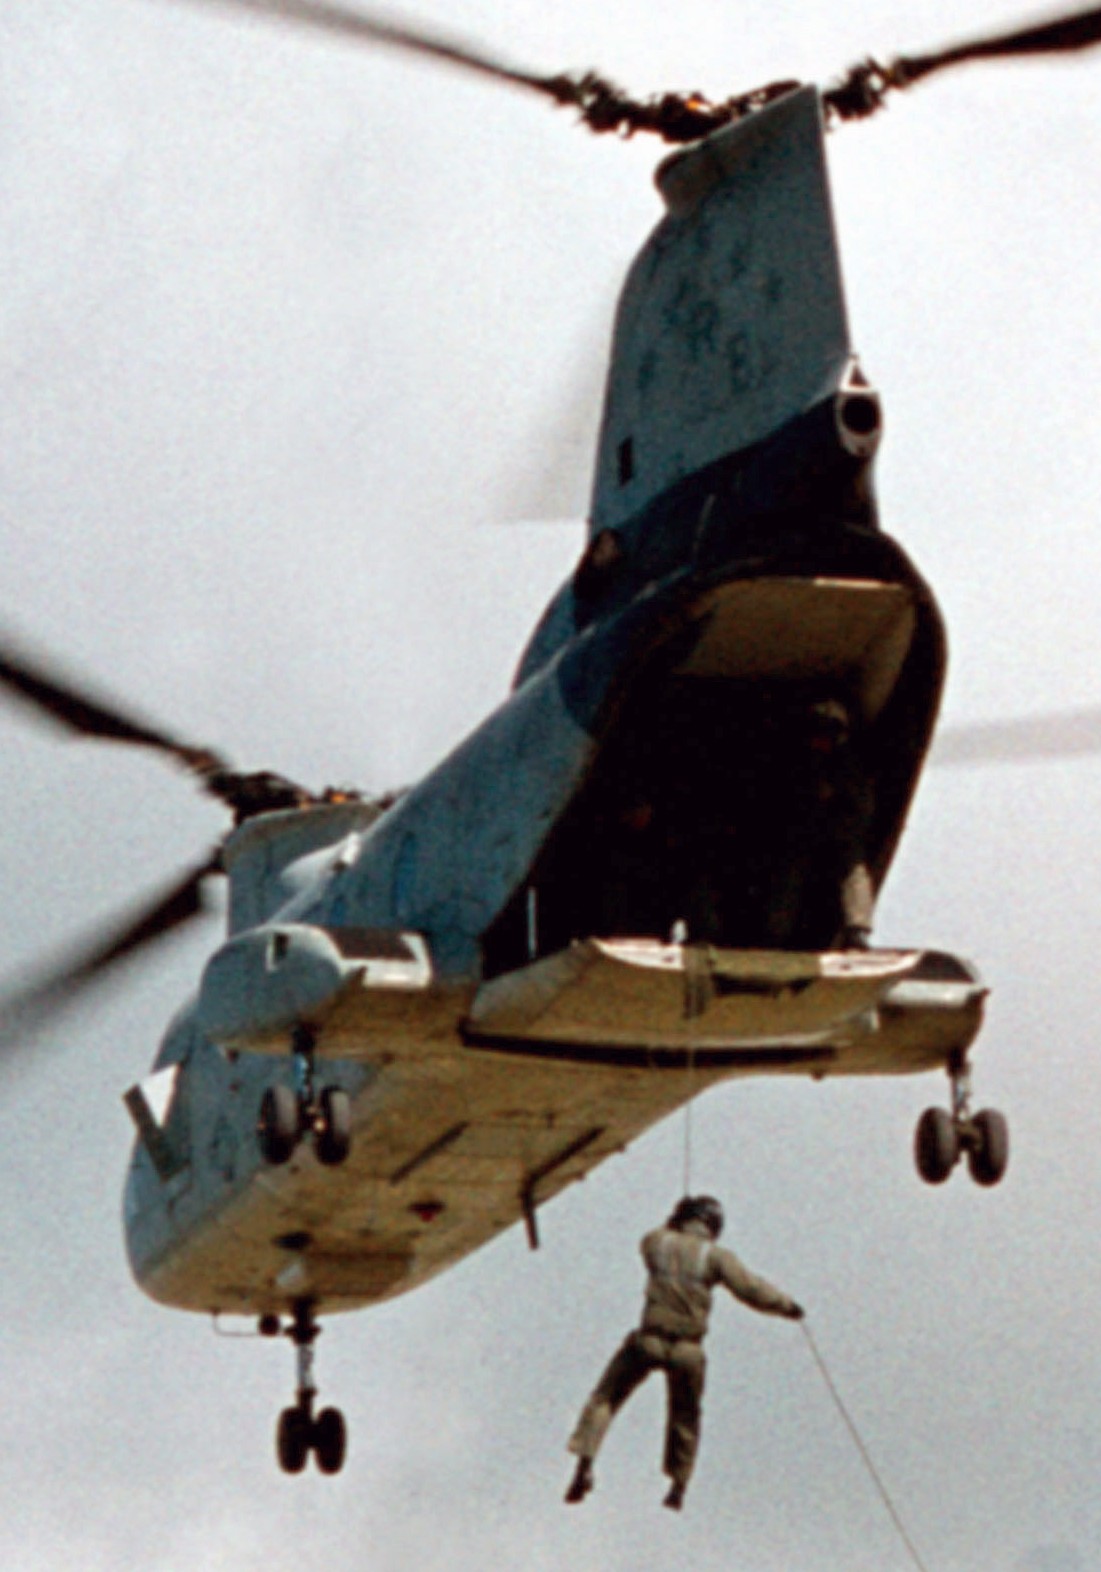 hc-5 providers helicopter combat support squadron navy hh-46d sea knight 44